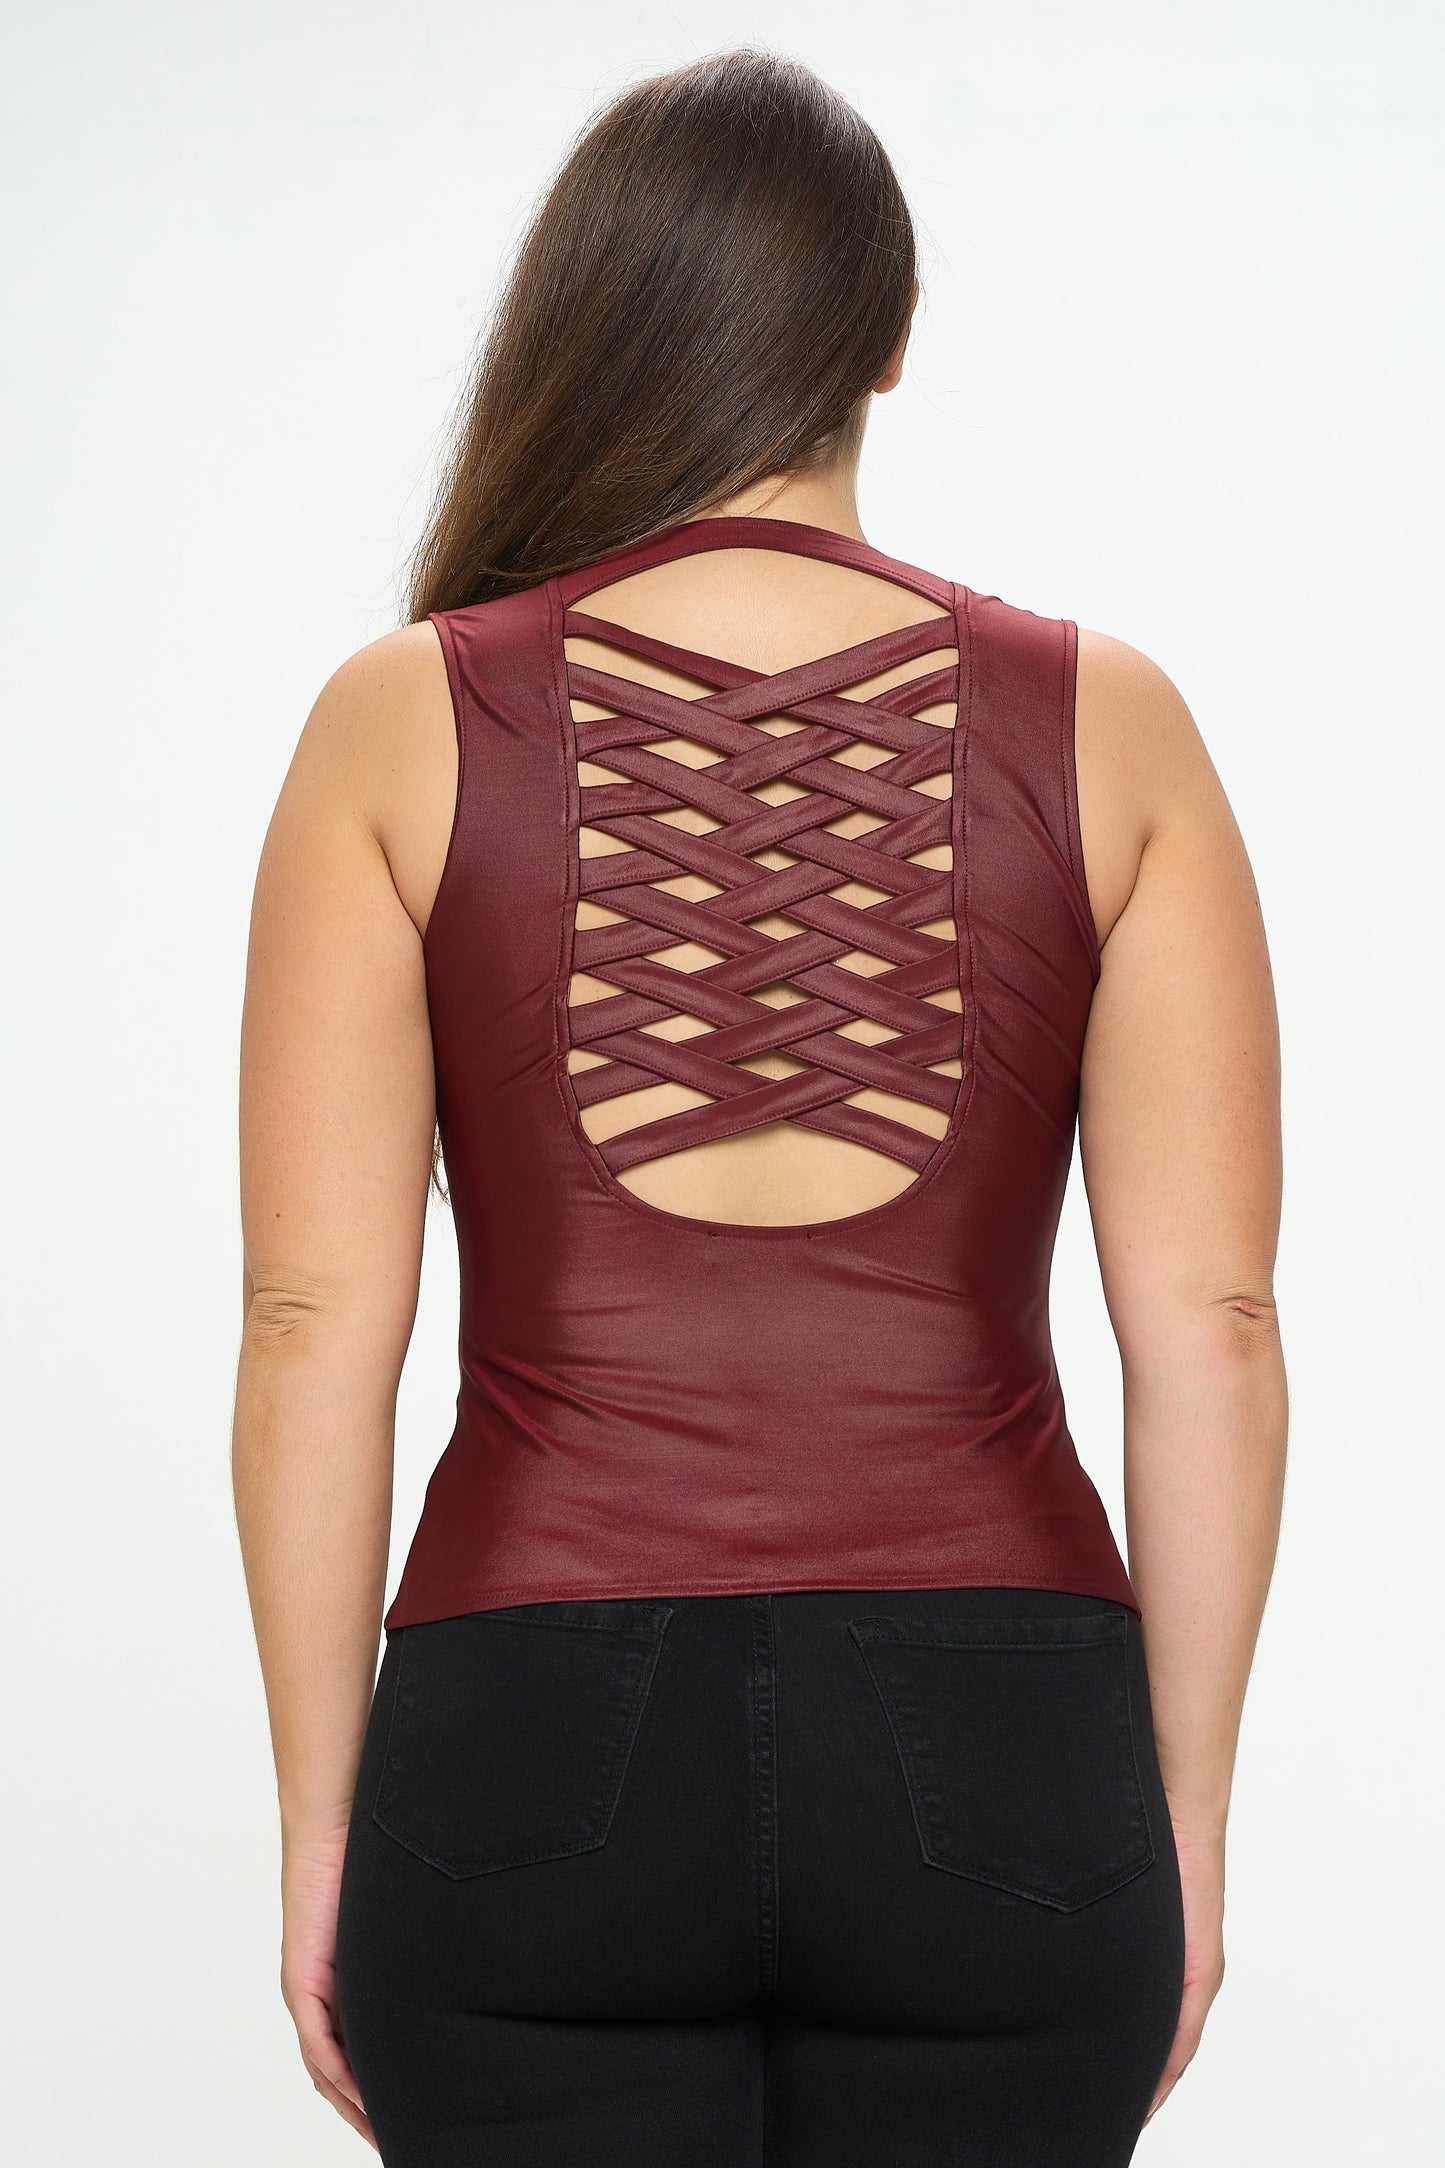 LACE-UP DETAIL ZIP UP SLEEVELESS TOP -PLUS